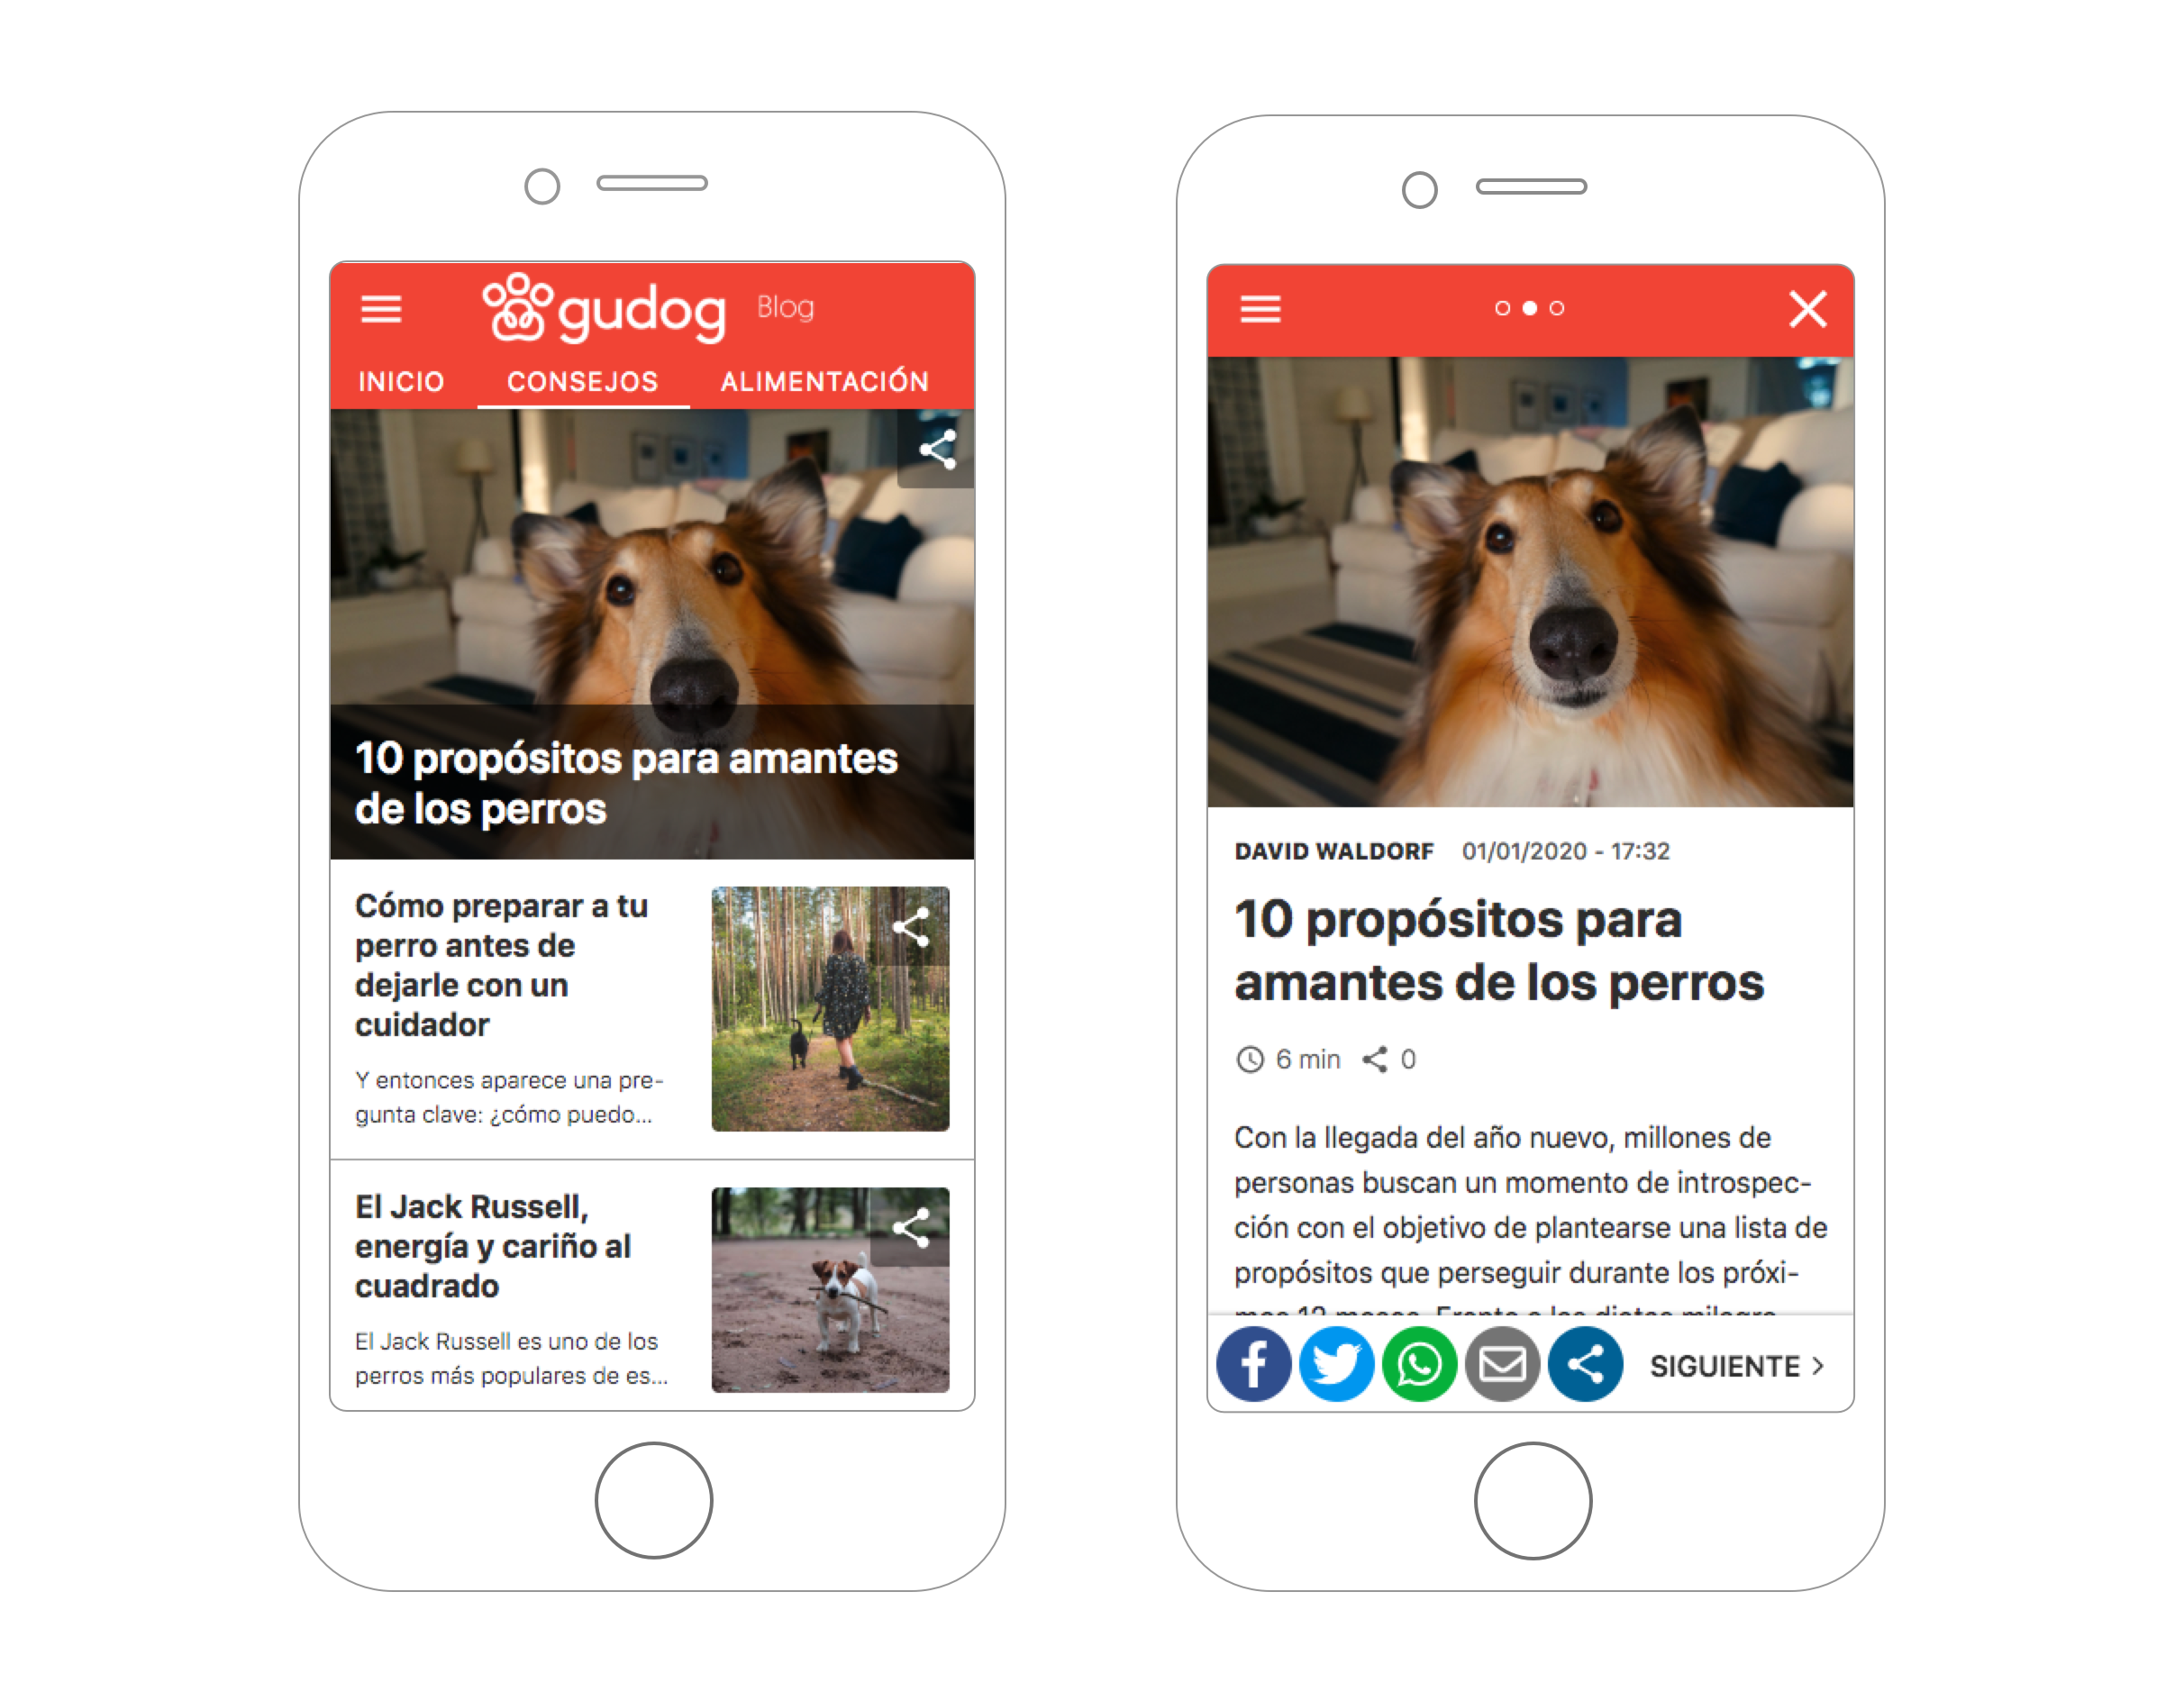 Gudog's blog on mobile using Frontity's theme.](https://i2.wp.com/wp.frontity.org/wp-content/uploads/2020/02/home-and-post-view-gudog-blog.png?fit=580%2C452&ssl=1)